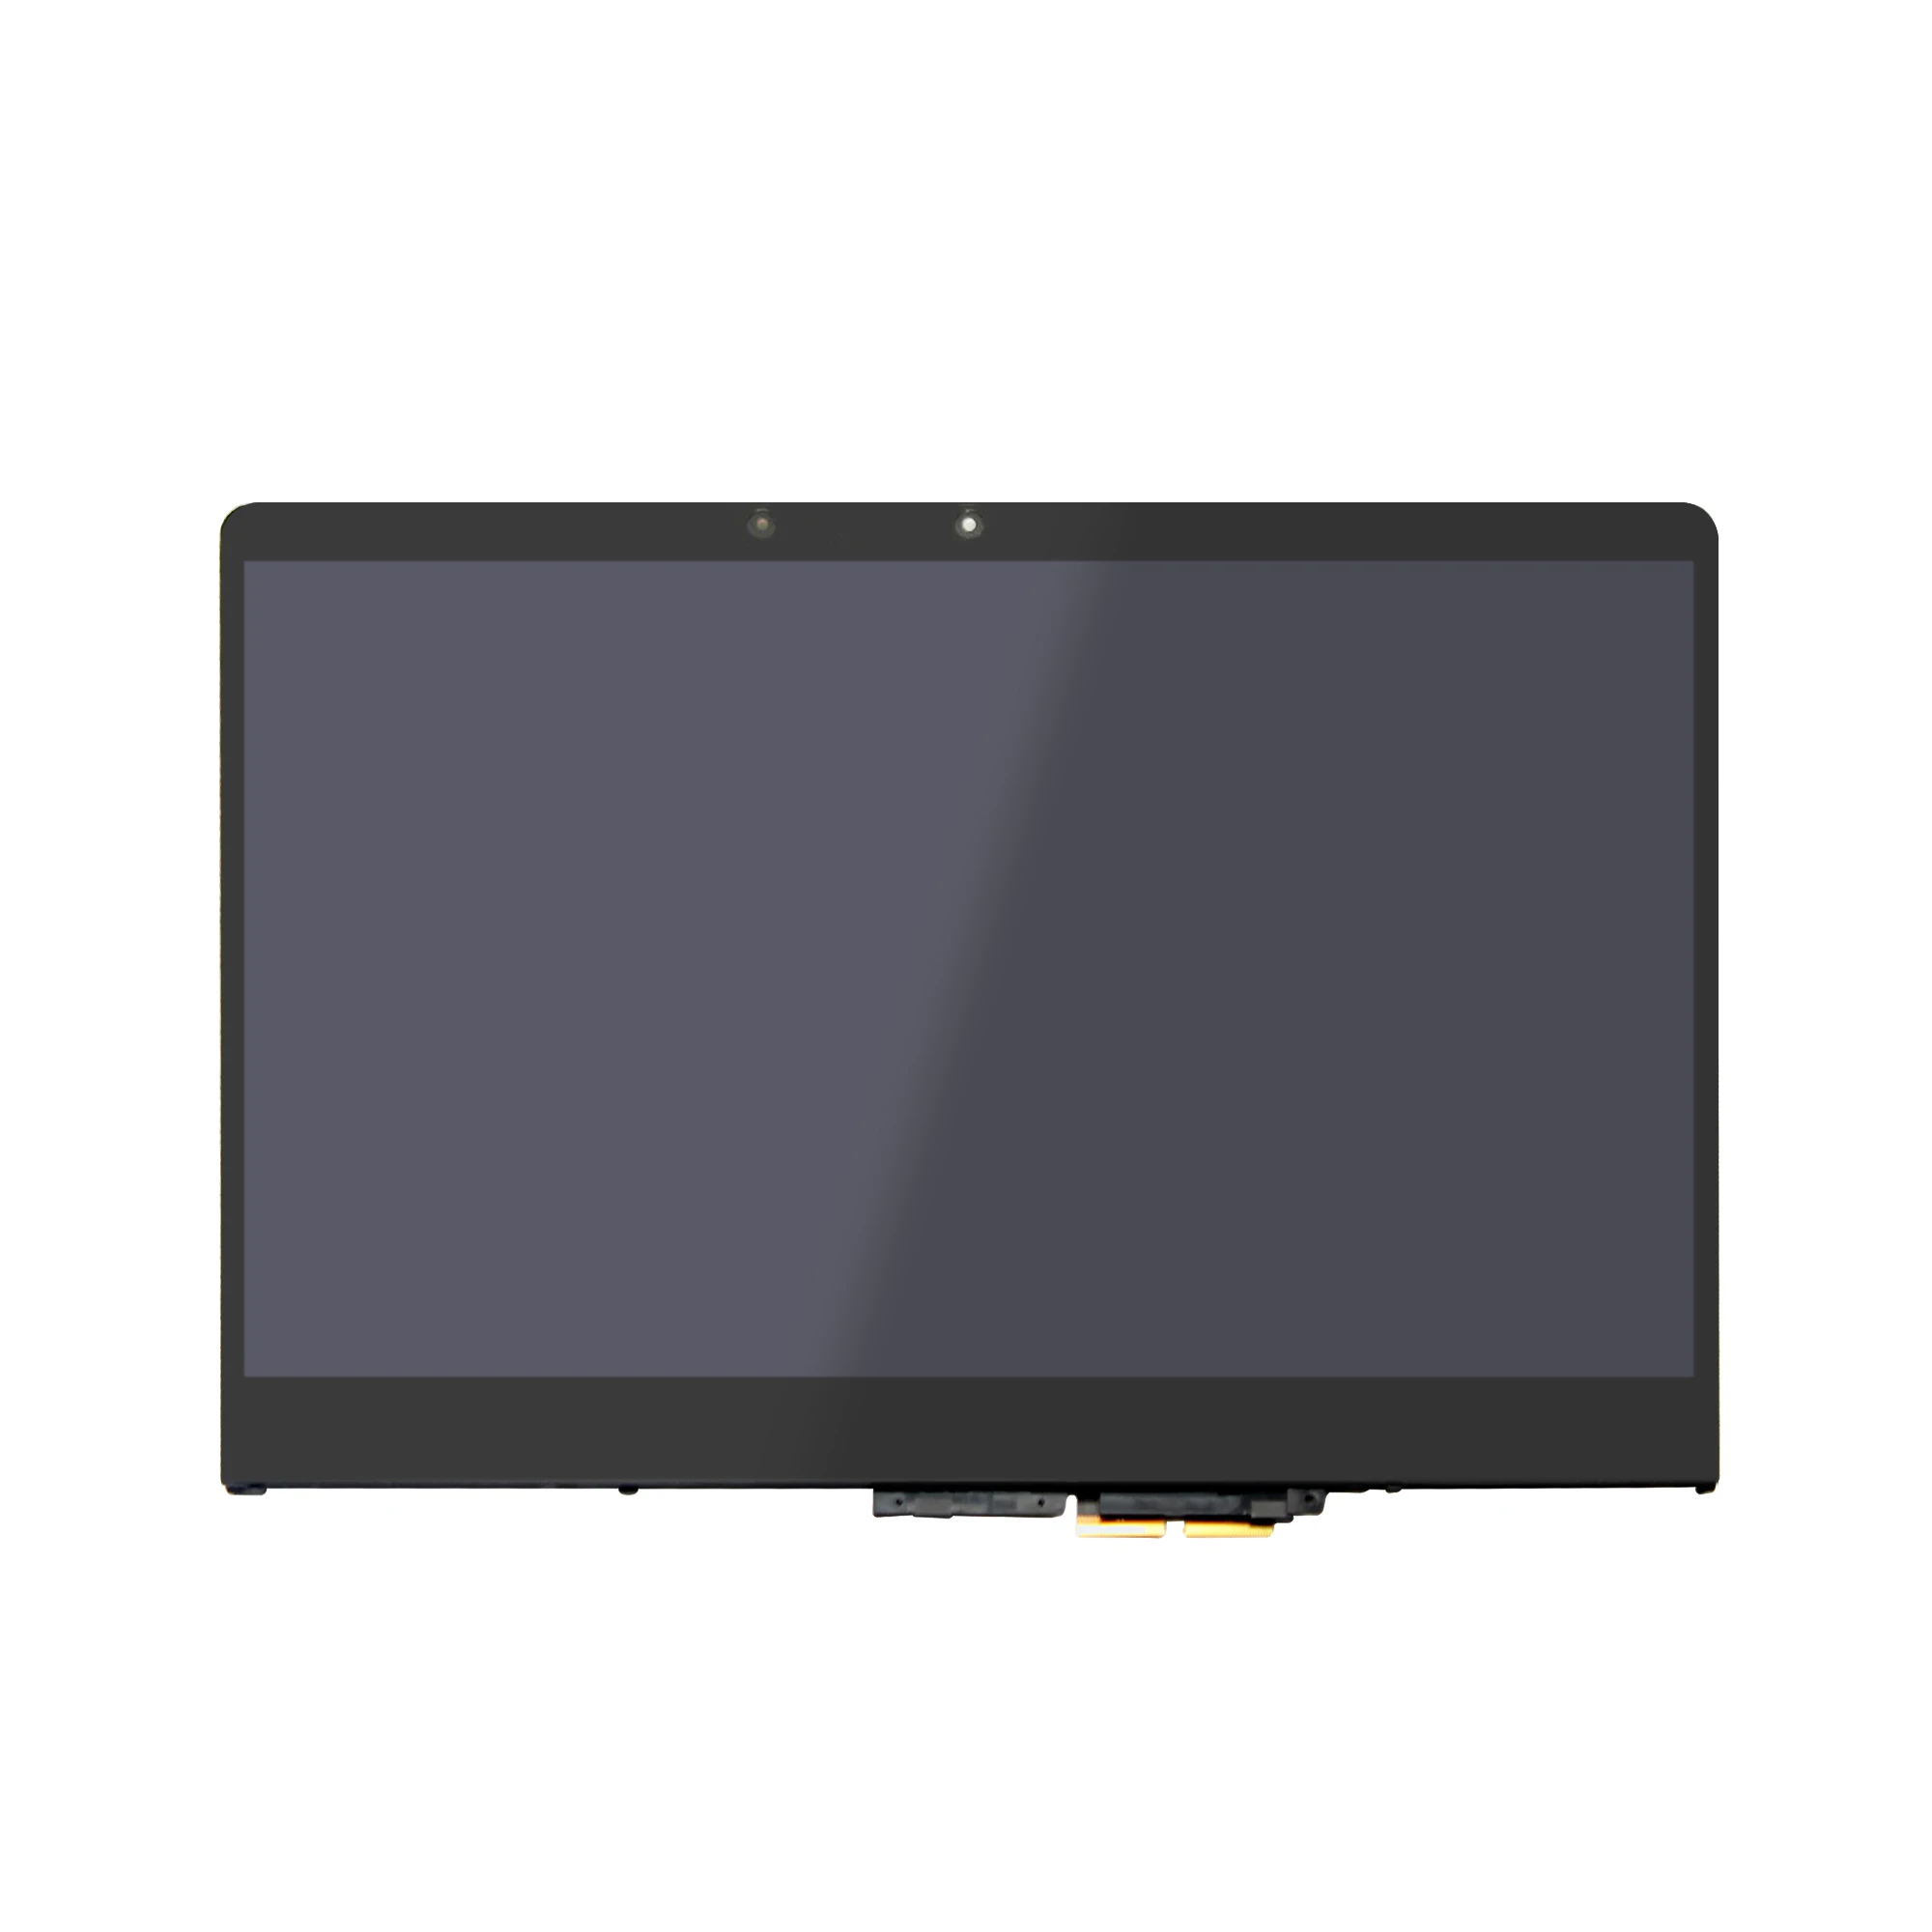 For Lenovo Yoga 710-14ikb 80v4 Yoga 710-14isk 80ty 5d10m14182 5d10k81065  5d10k81085 Lcd Touch Display Screen Digitizer Module - Buy Touch Screen  Module,Yoga 710-14ikb 80v4 Yoga 710-14isk 80ty,5d10m14182 5d10k81065  5d10k81085 Product on 